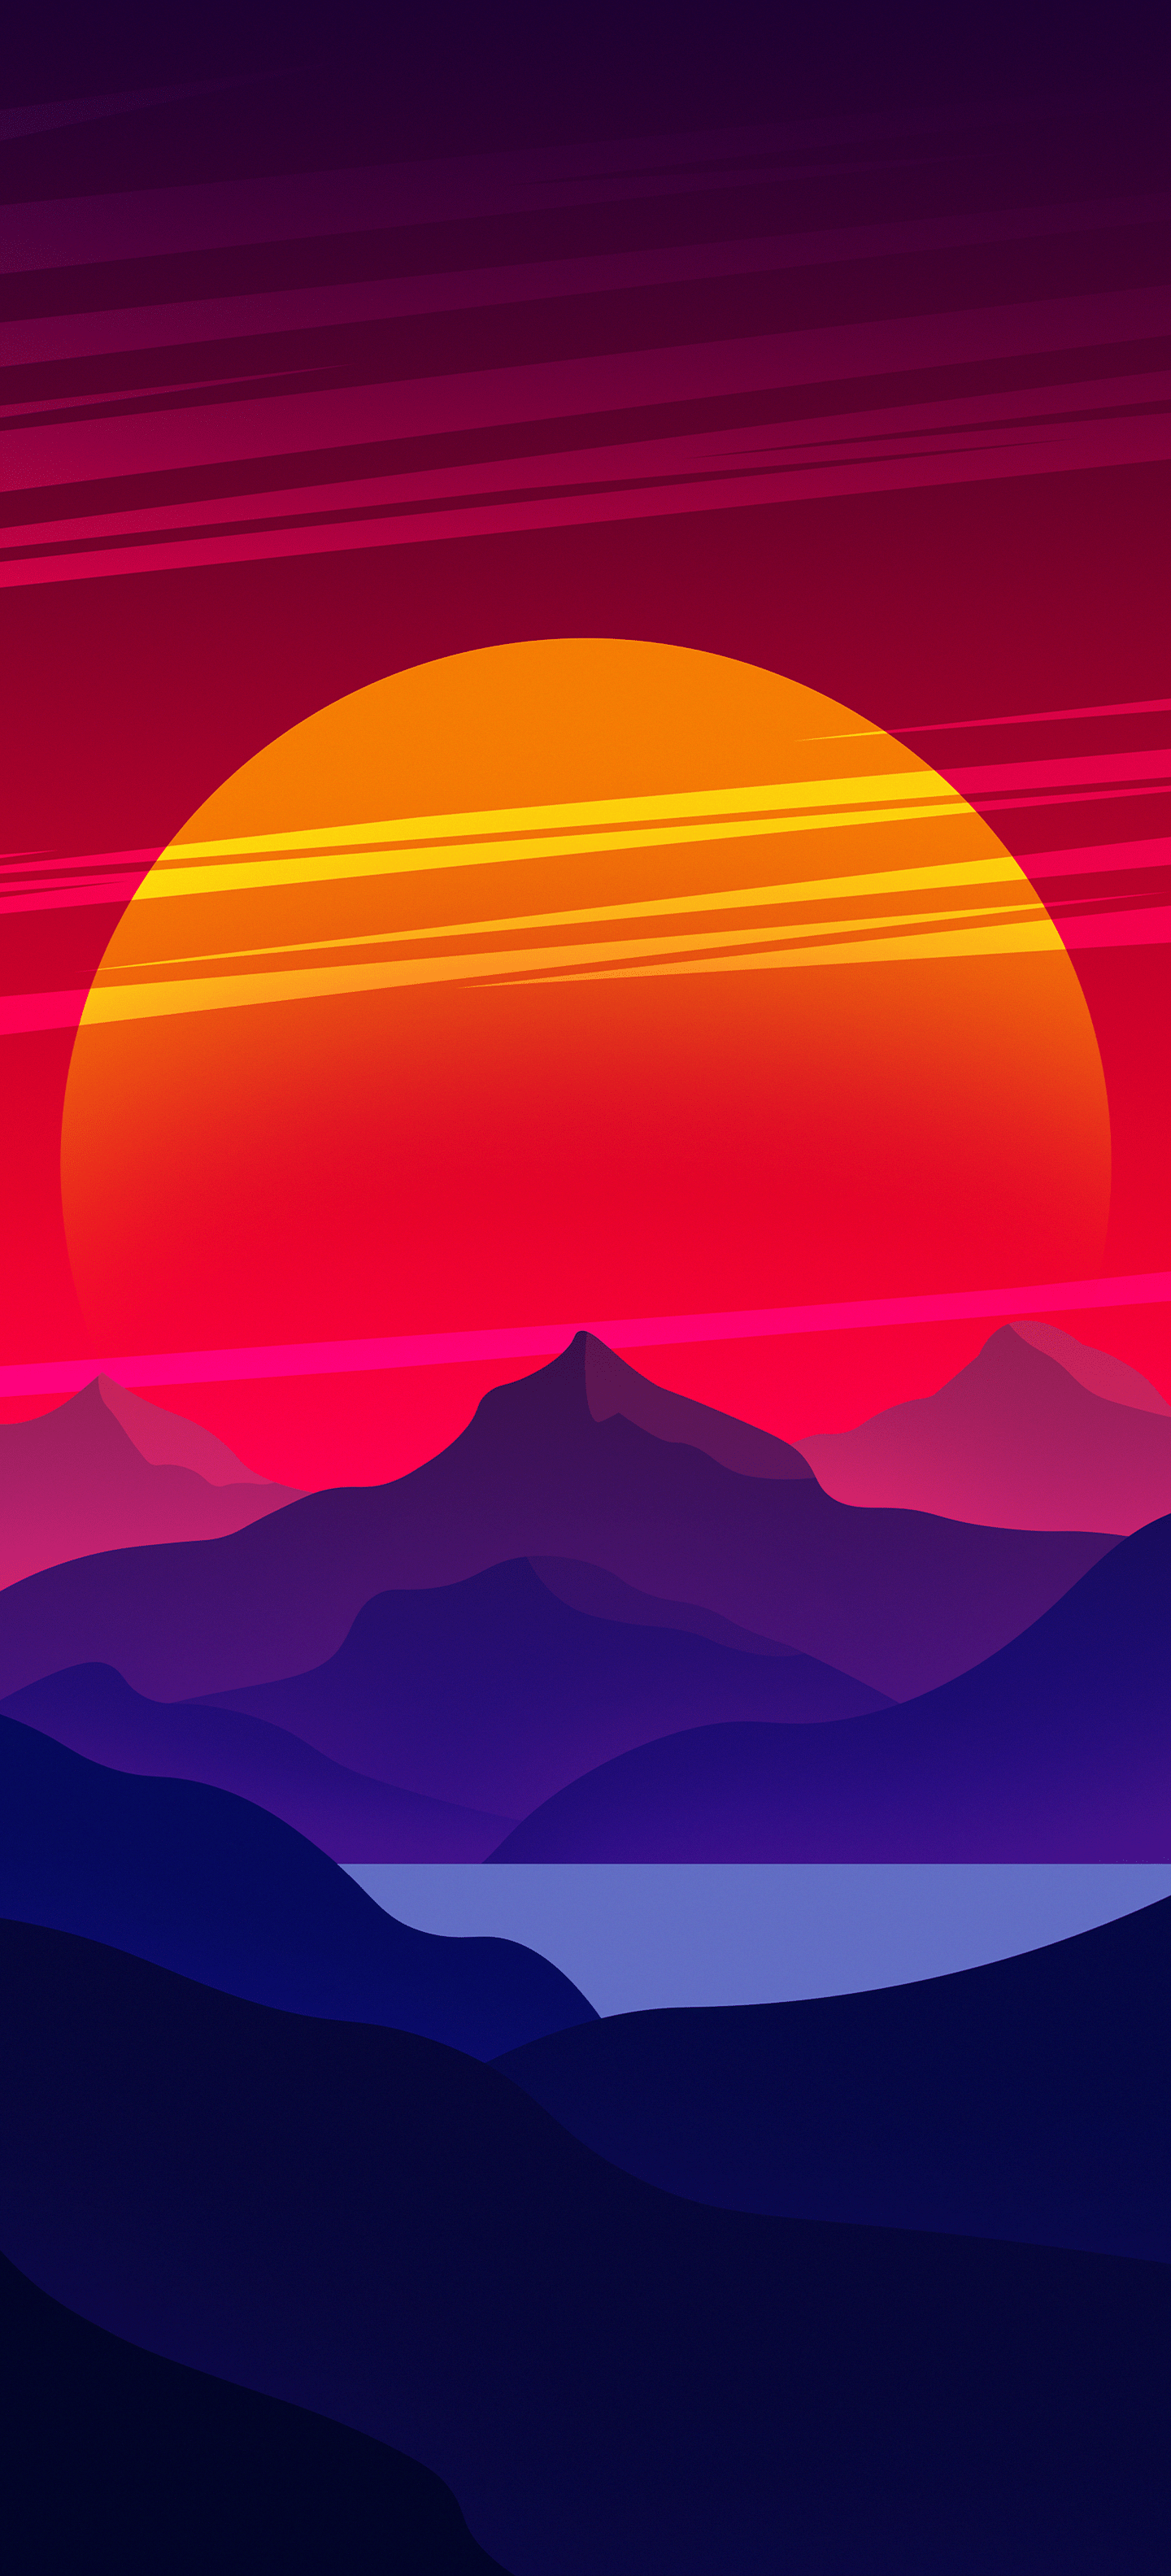 Sci Fi Mountain Scenes IPhone Wallpaper From The 80's